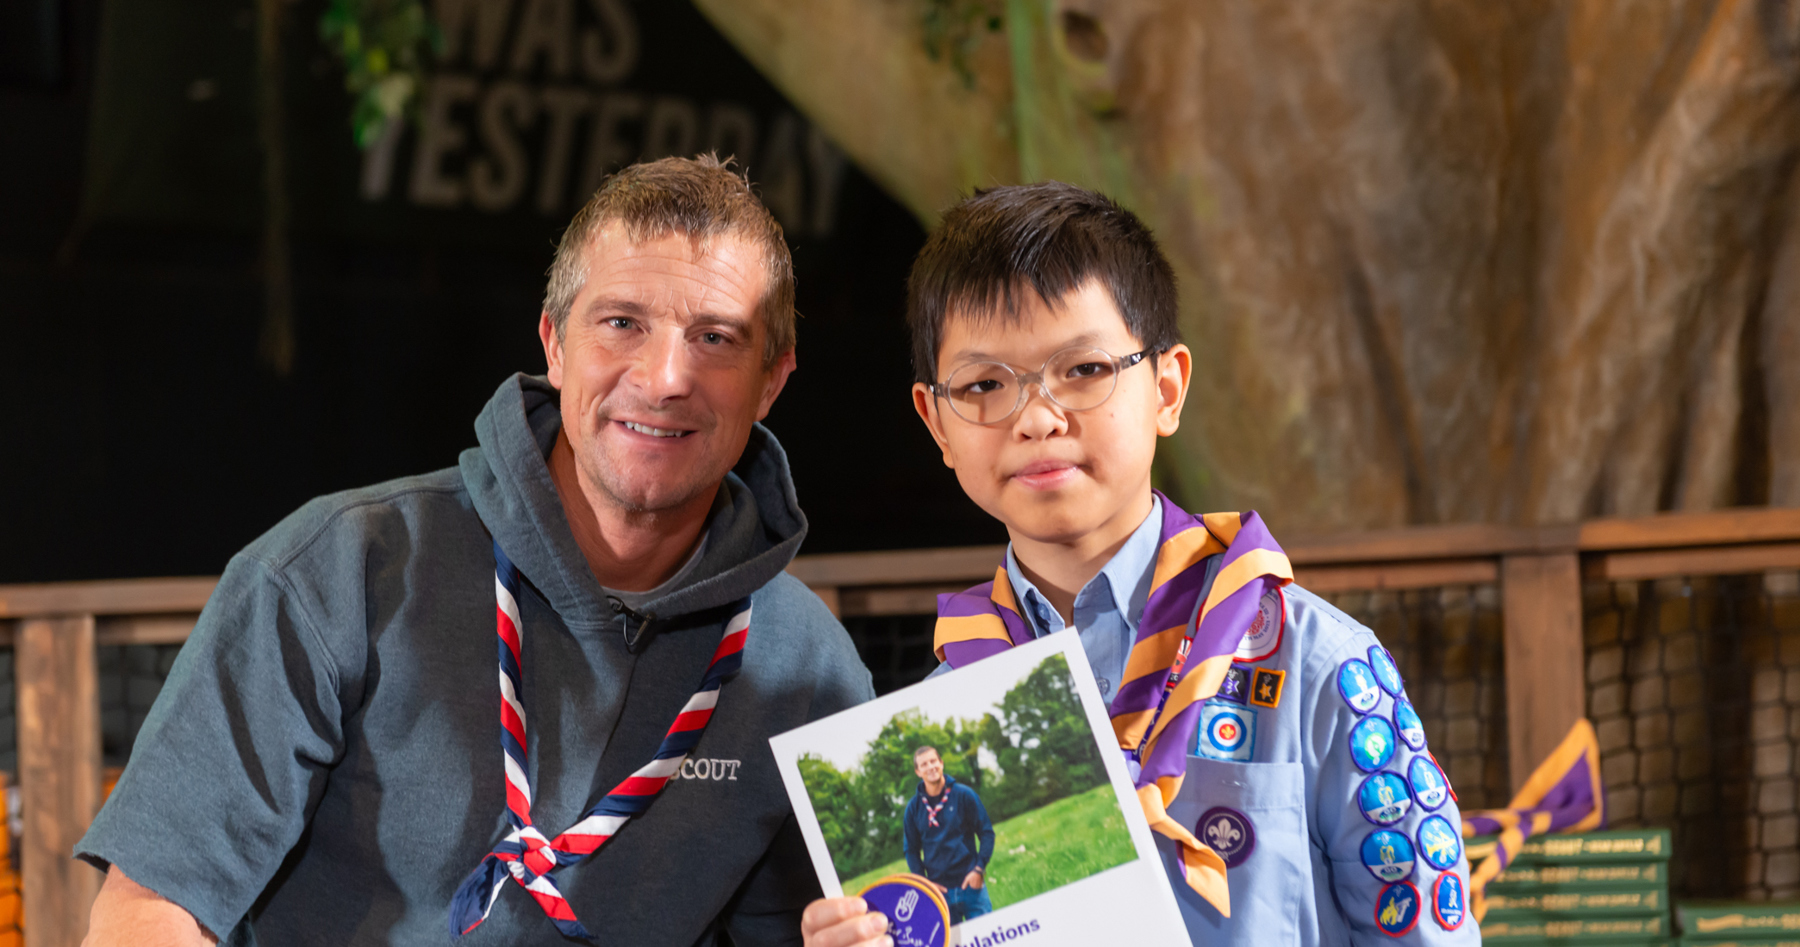 The image shows Chief Scout Bear Grylls stood with 2023 Unsung Hero award recipient, Ernest. Both are smiling at the camera, with Bear wearing a red, white and navy necker. Ernest is wearing glasses and his Scout shirt with badges on, as well as a purple and orange necker. Ernest is holding a certificate and a Never Give Up badge in his right hand.